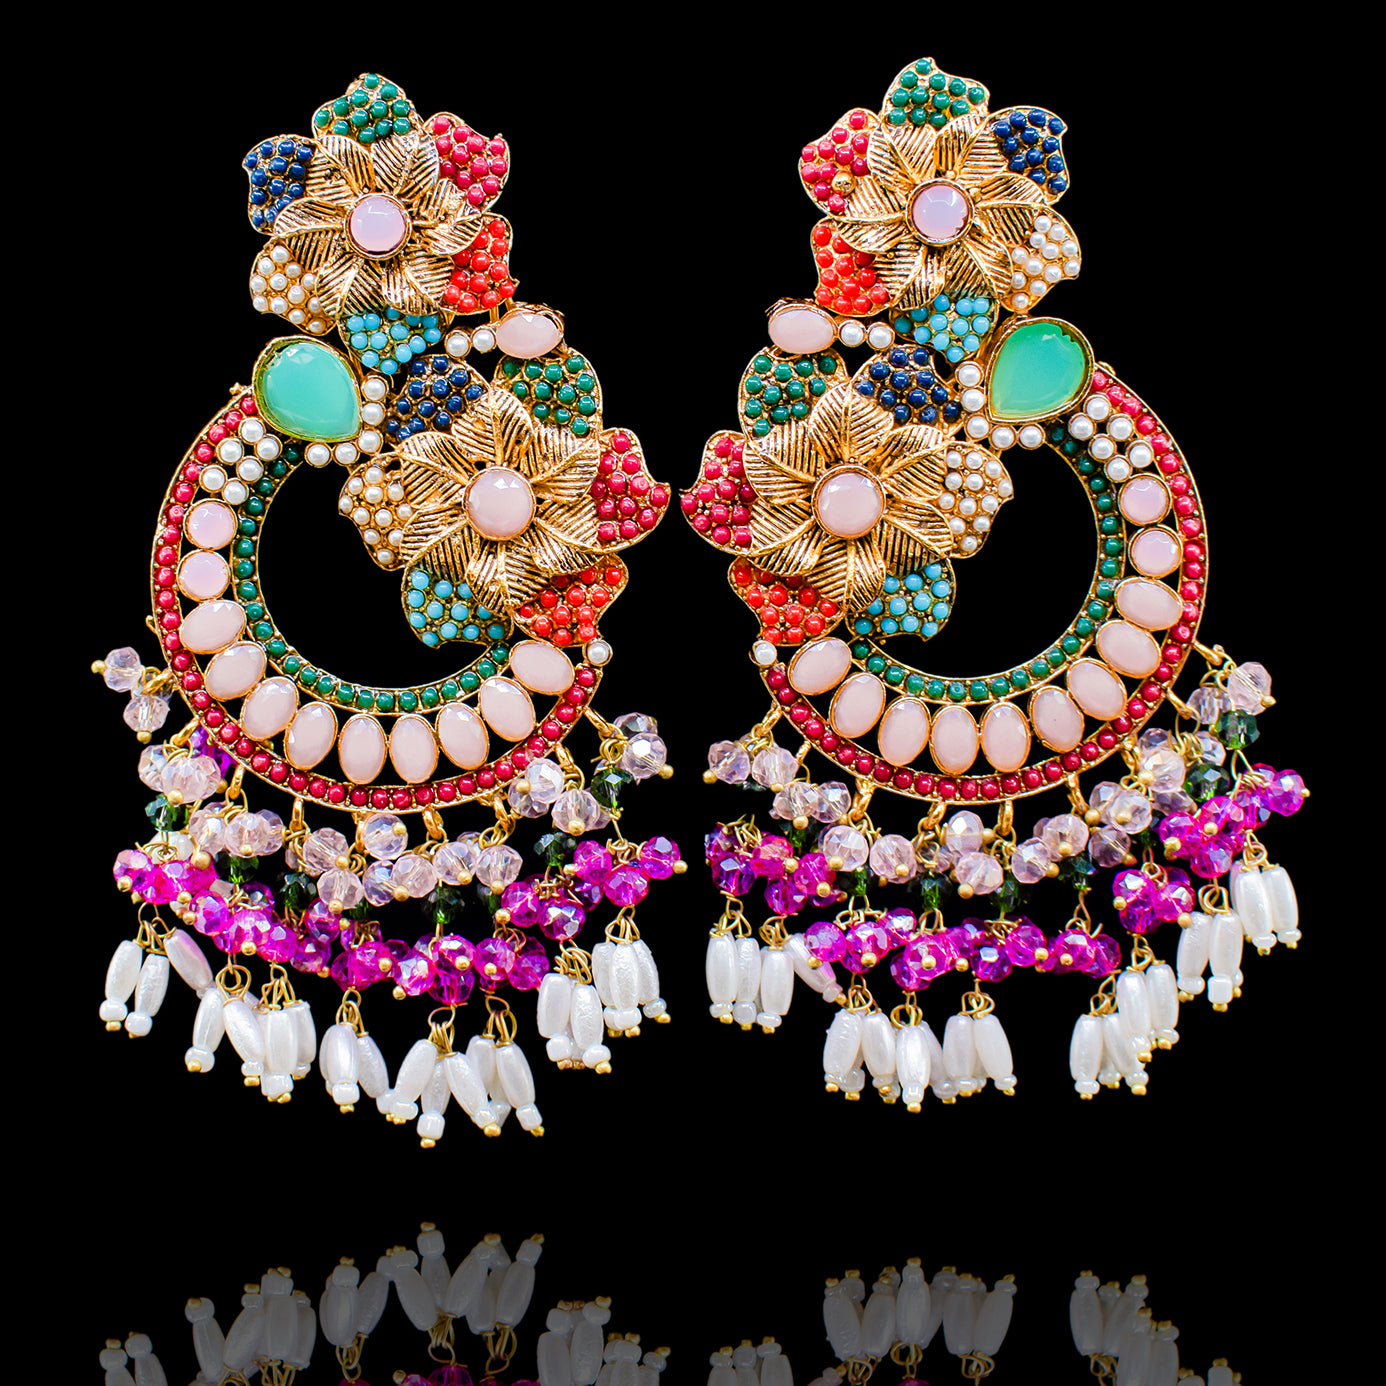 Raha Earrings - Available in 2 Colors